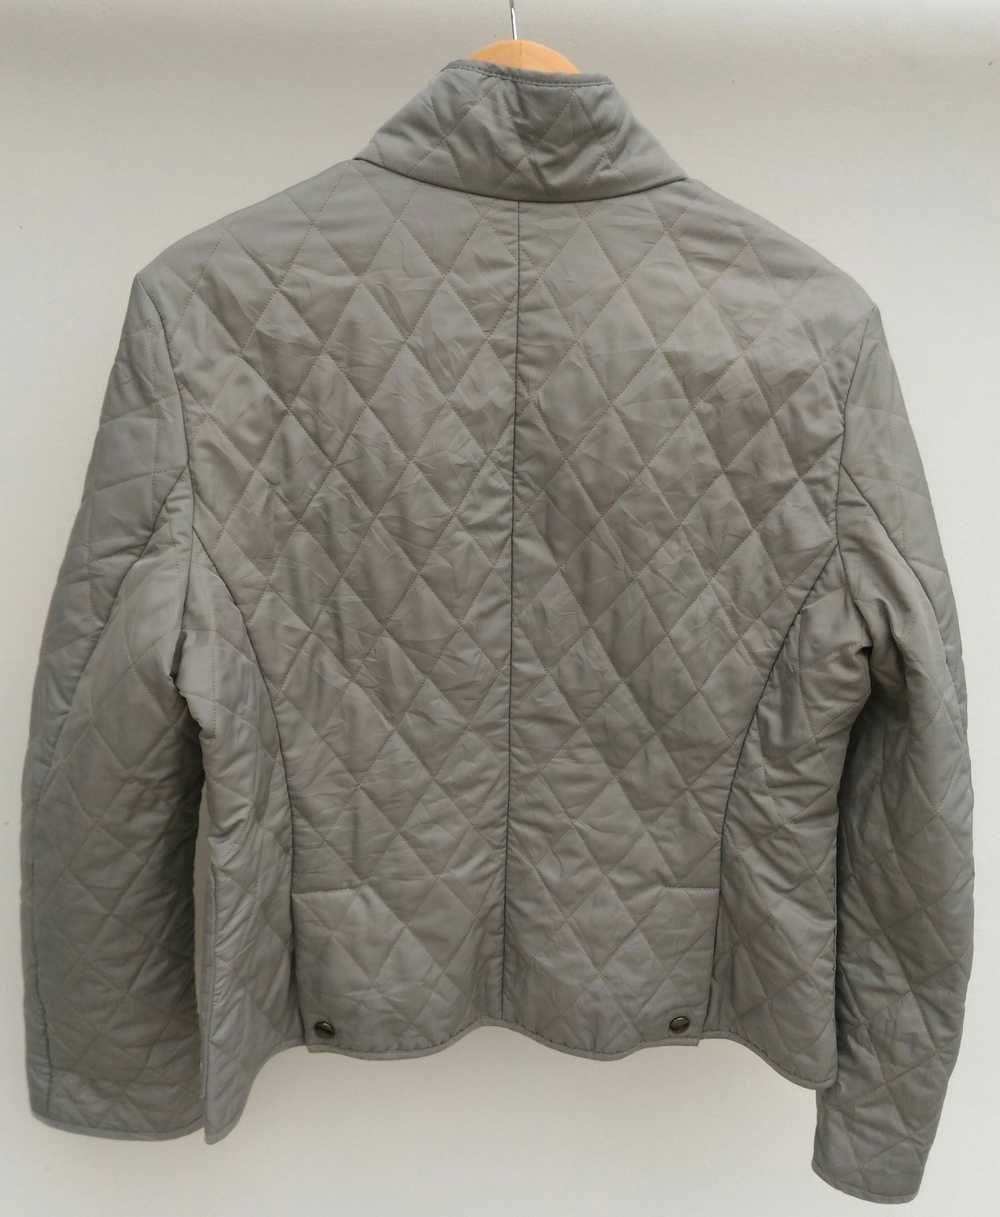 Burberry Made in England Women Quilted Jacket - image 2